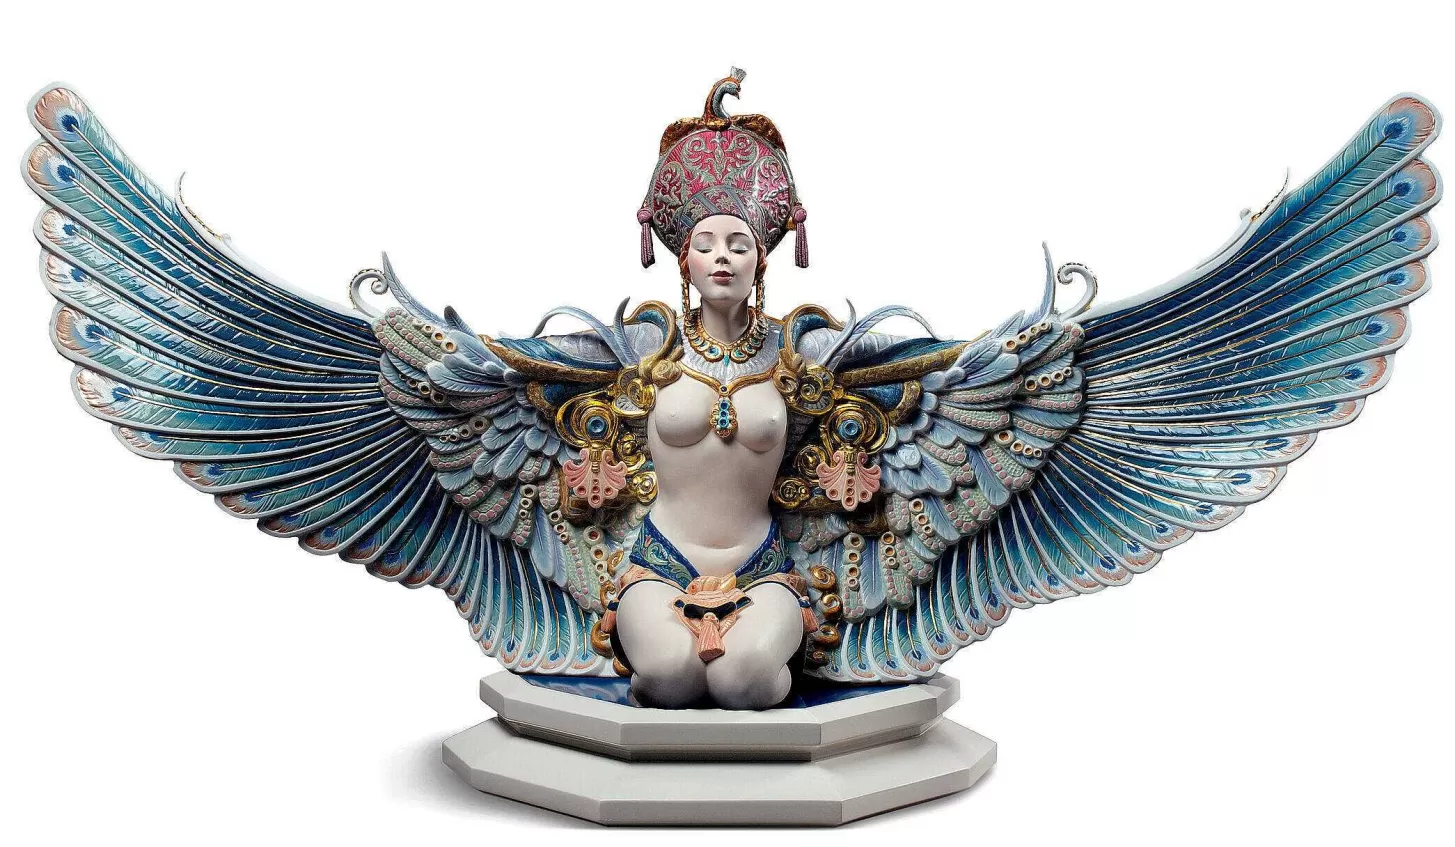 Lladró Winged Fantasy Woman Sculpture. Limited Edition^ High Porcelain